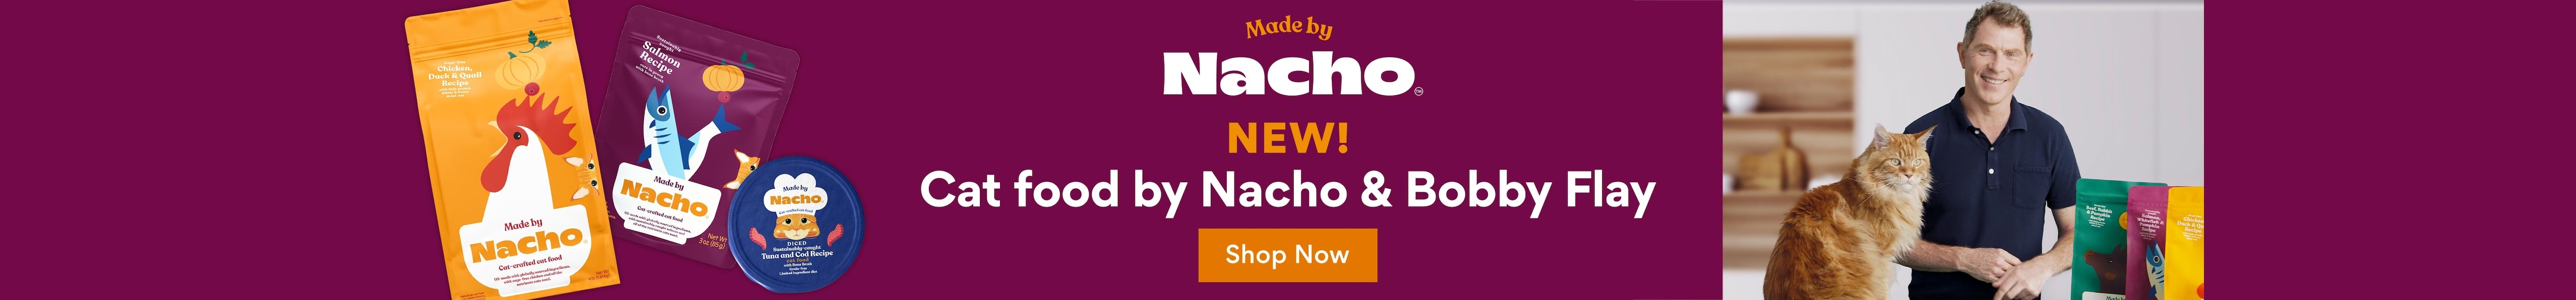 Made by Nacho NEW! Cat food by Nacho & Bobby Flay. Shop now